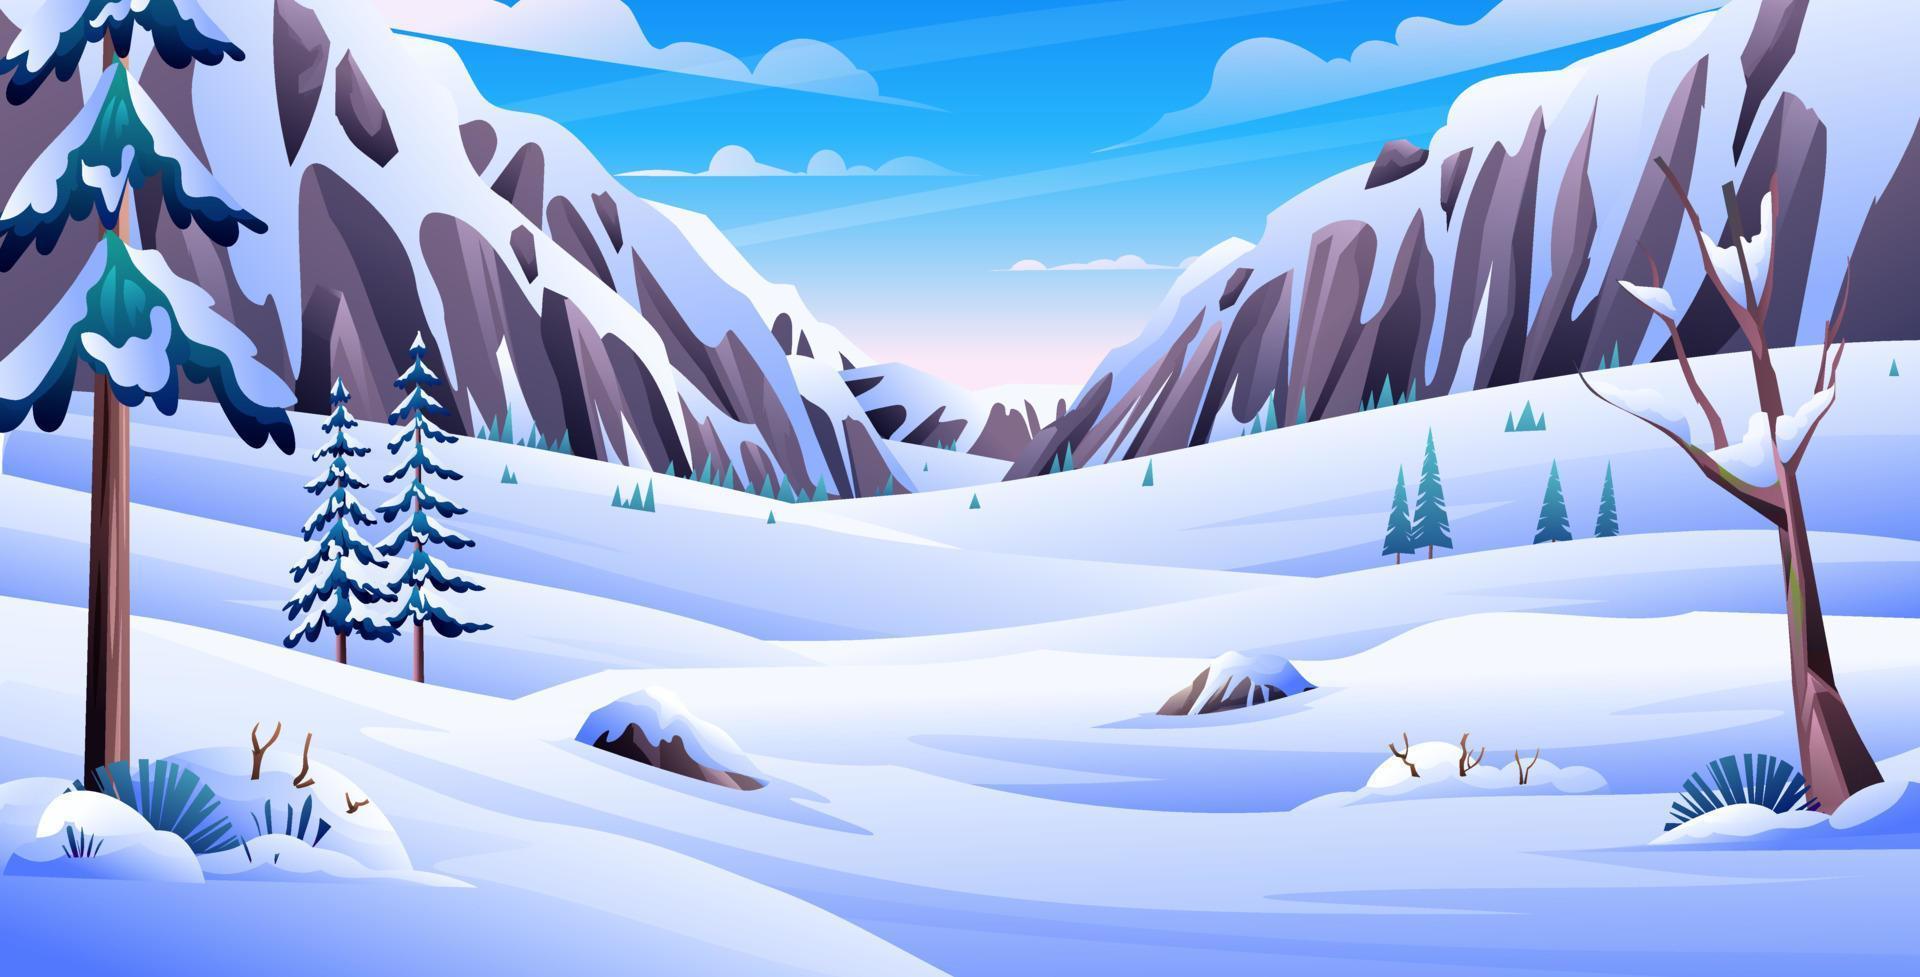 Winter snowy landscape with pines and rocky mountains background cartoon illustration vector